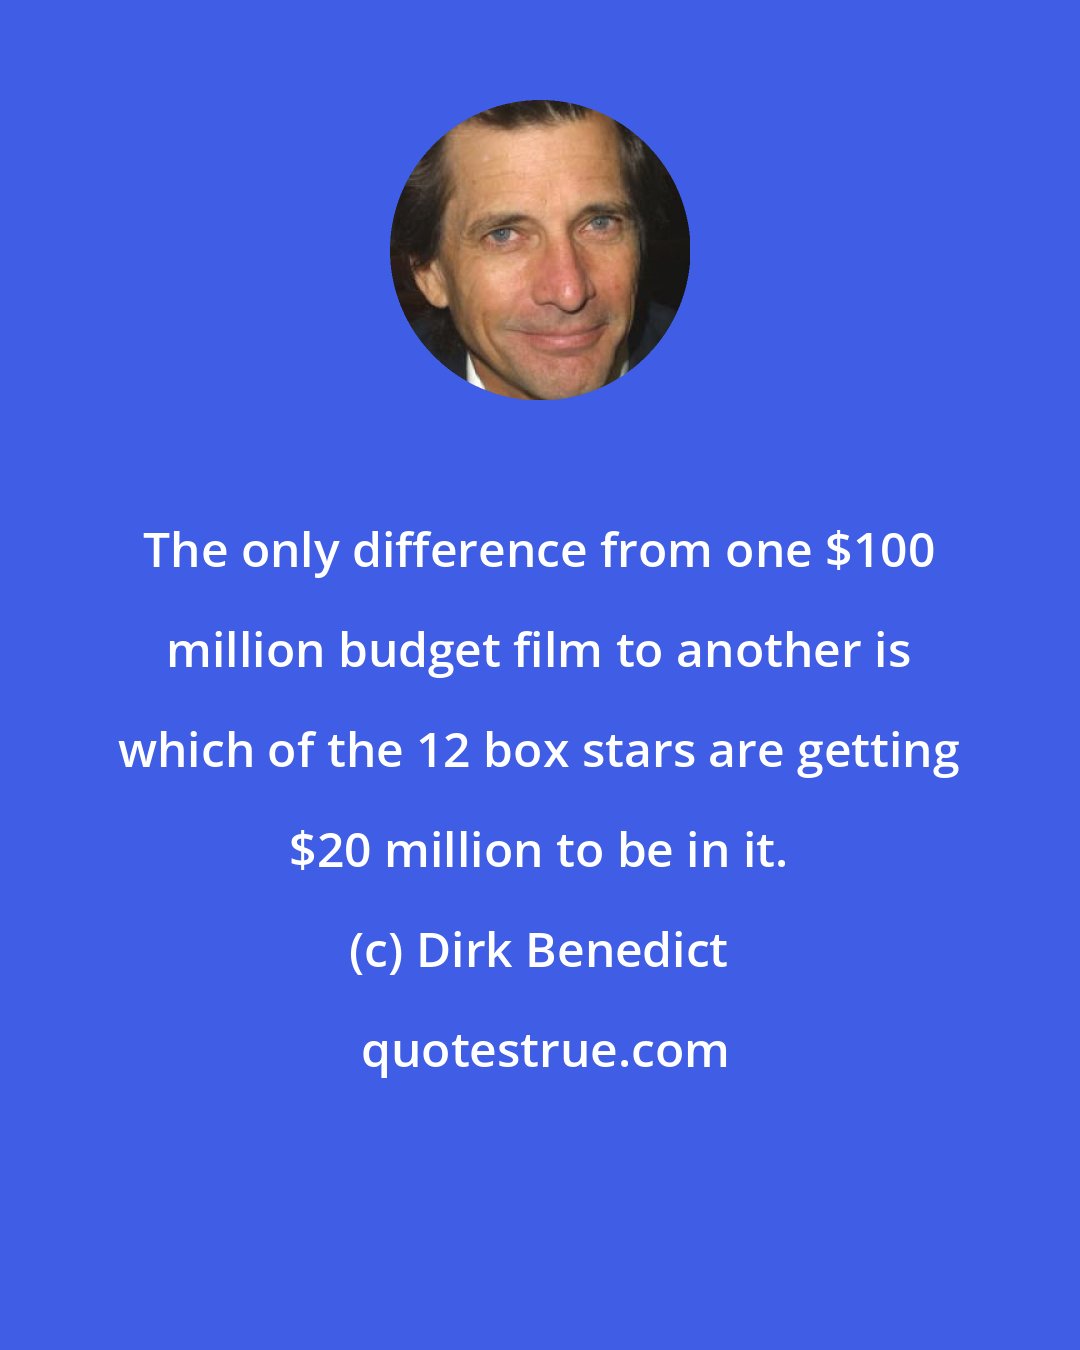 Dirk Benedict: The only difference from one $100 million budget film to another is which of the 12 box stars are getting $20 million to be in it.